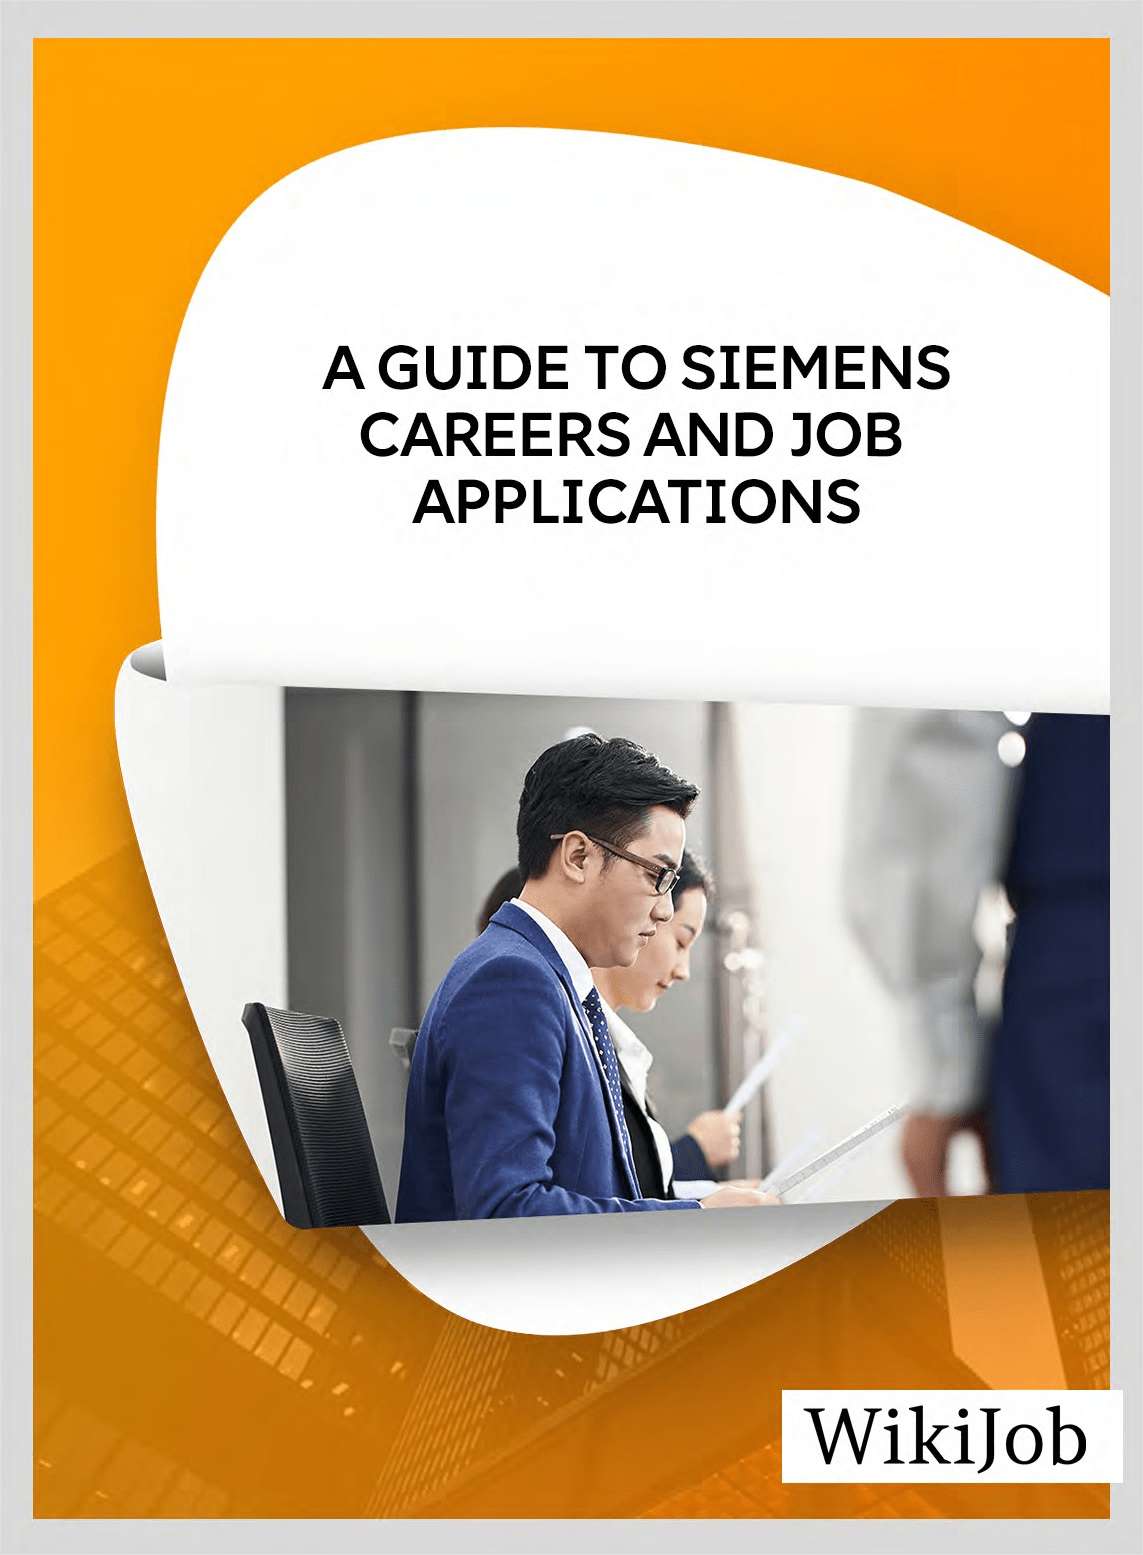 A Guide to Siemens Careers and Job Applications